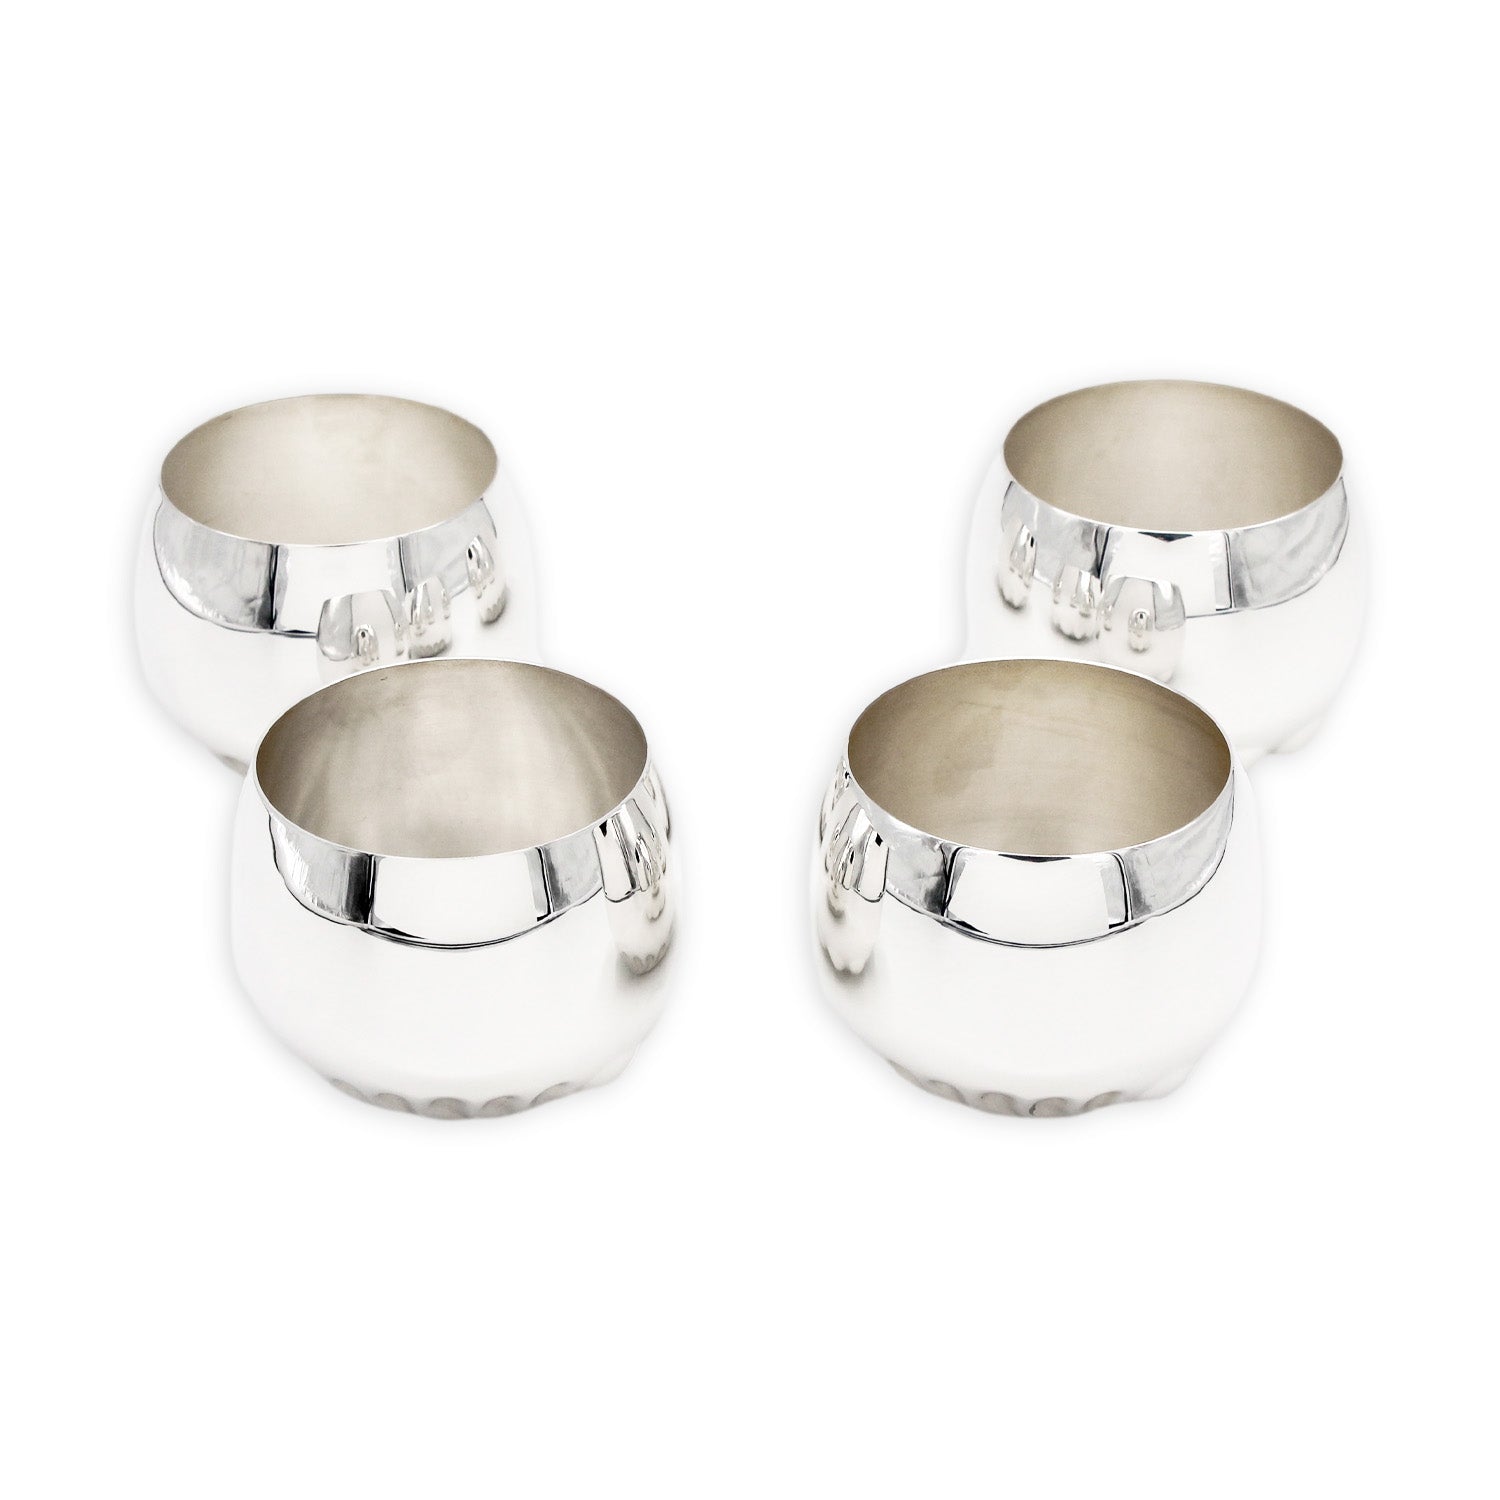 Julia B. Glossy Silver Plated Wine Cups